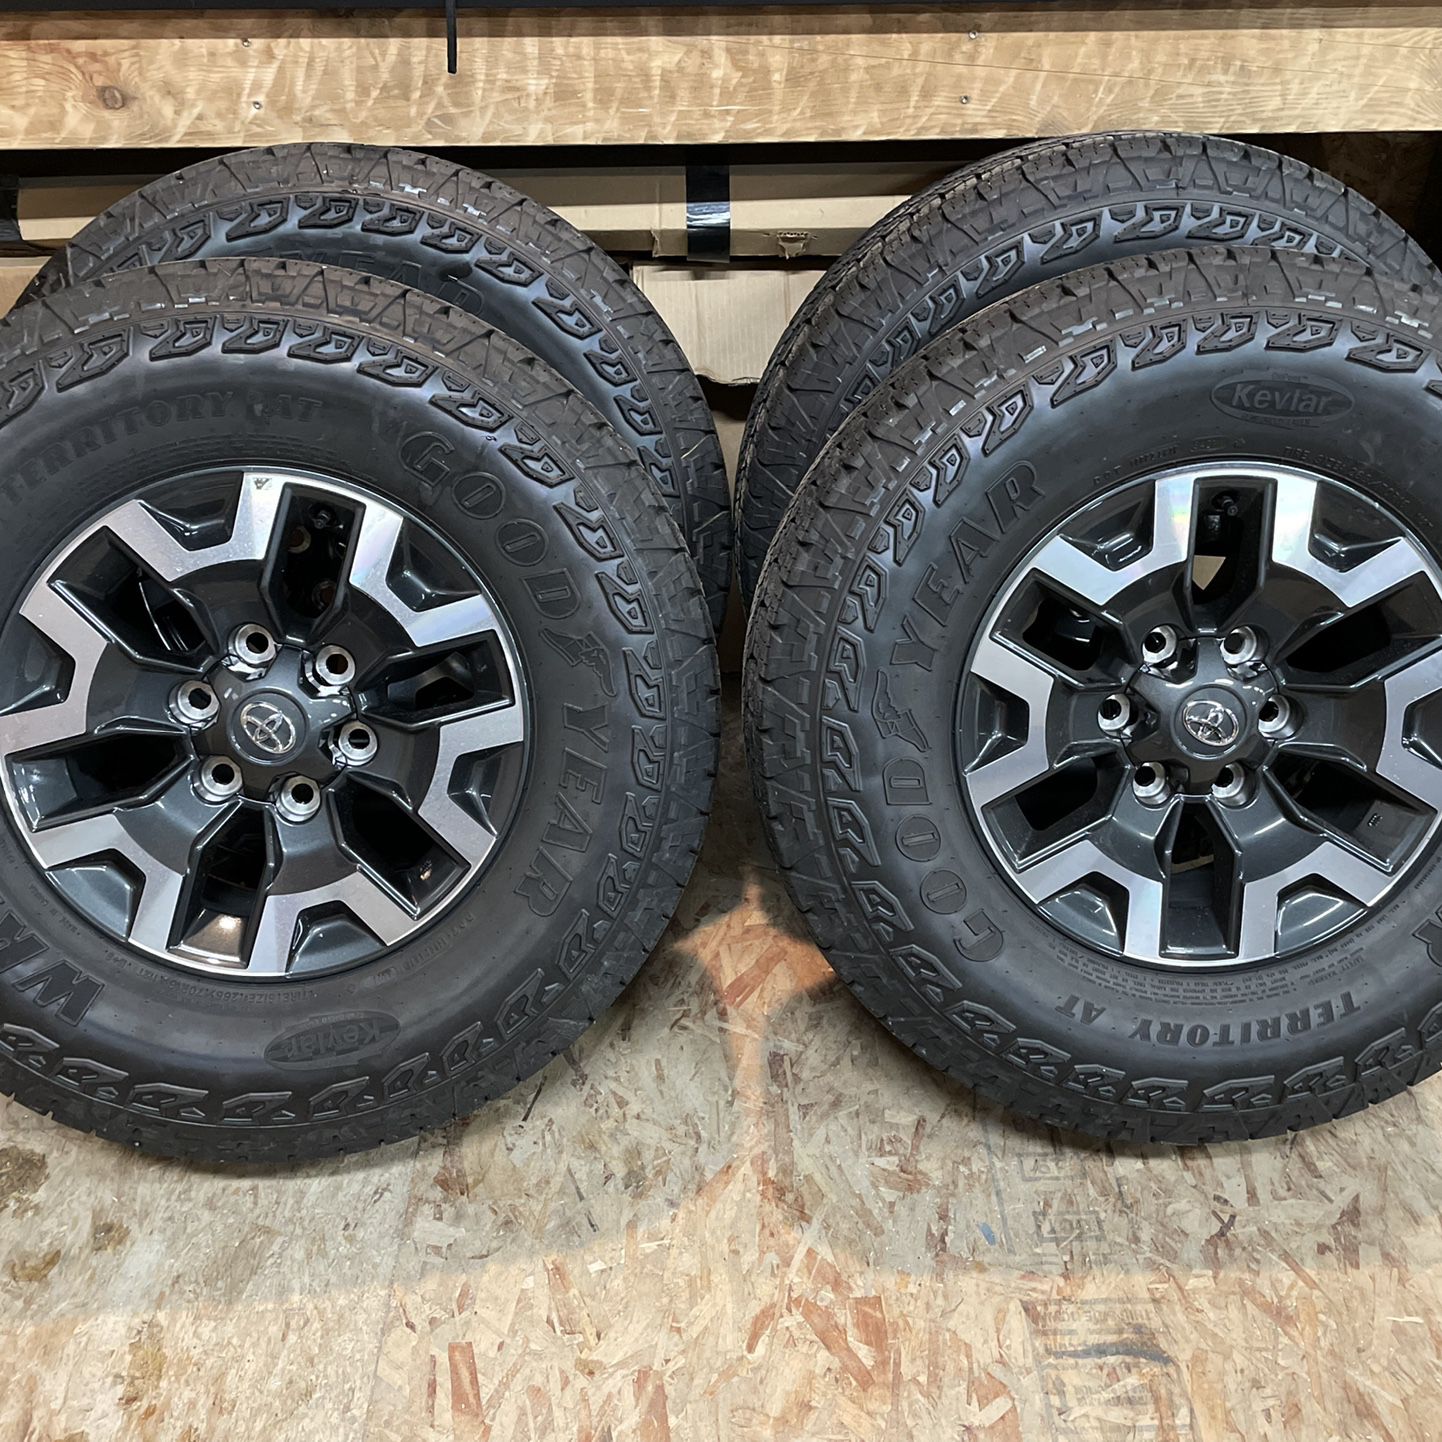 2022 Tacoma Wheels and Tires for Sale in Issaquah, WA - OfferUp